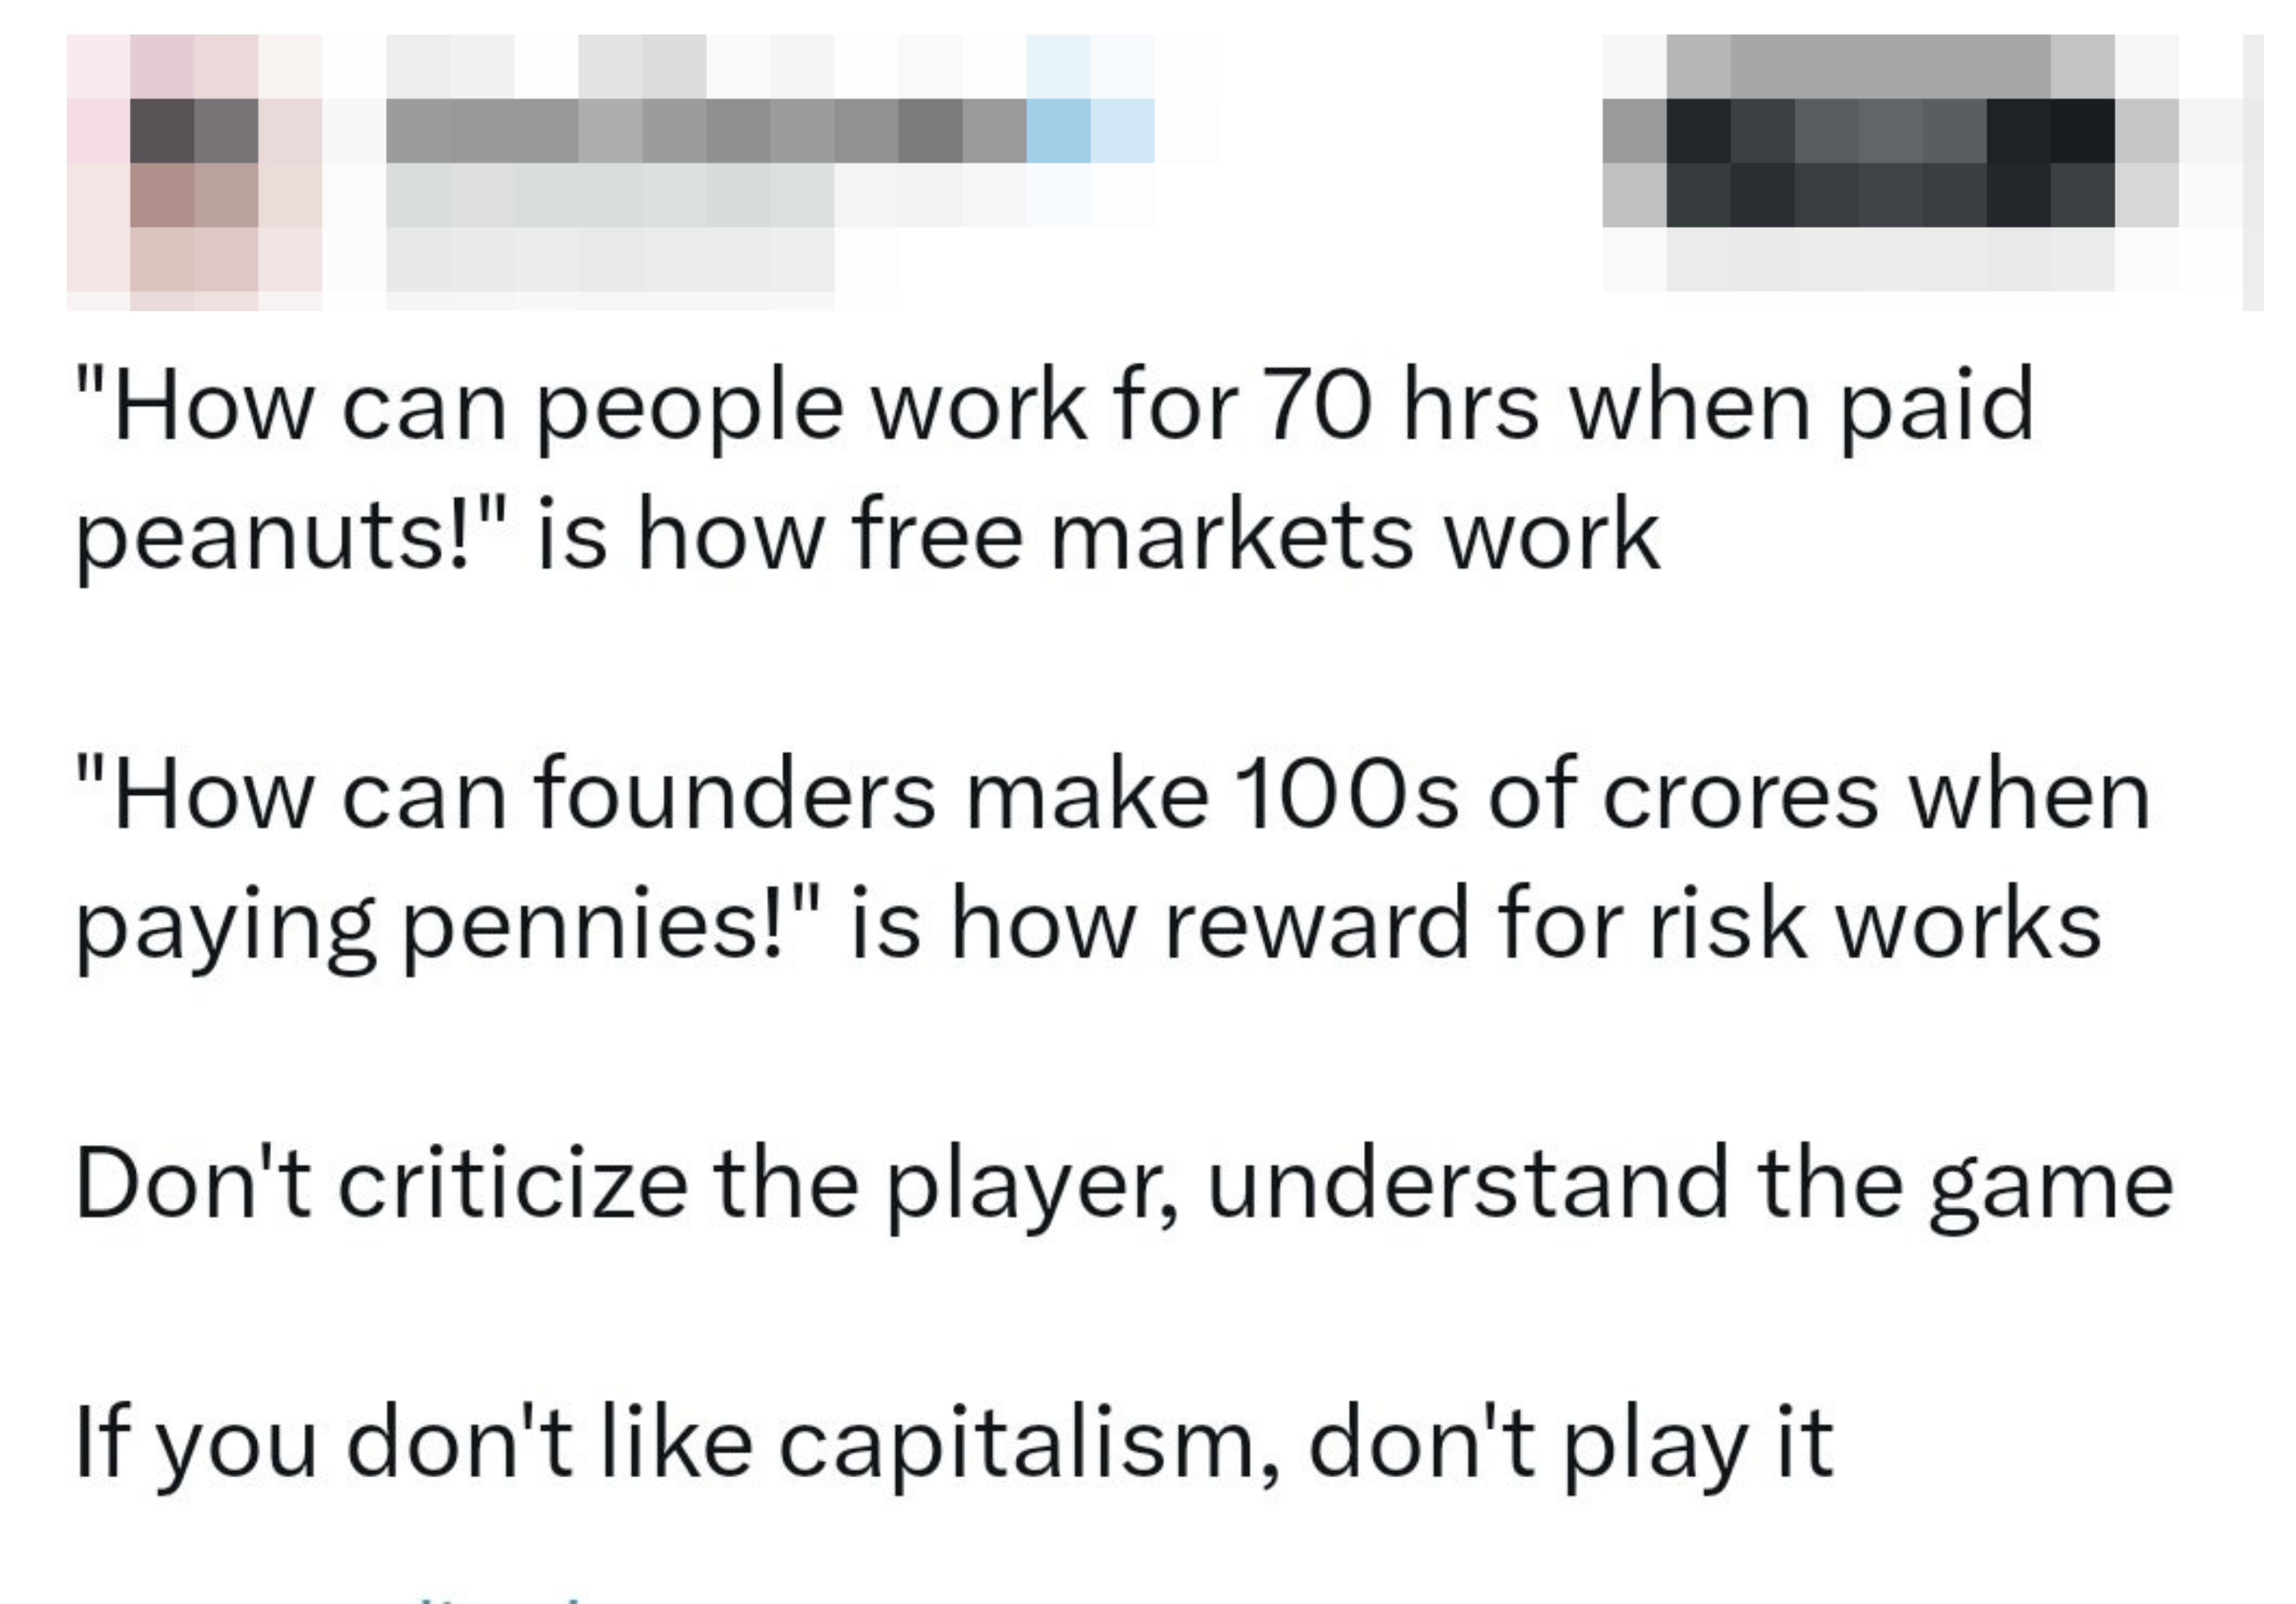 &quot;If you don&#x27;t like capitalism, don&#x27;t play it&quot;